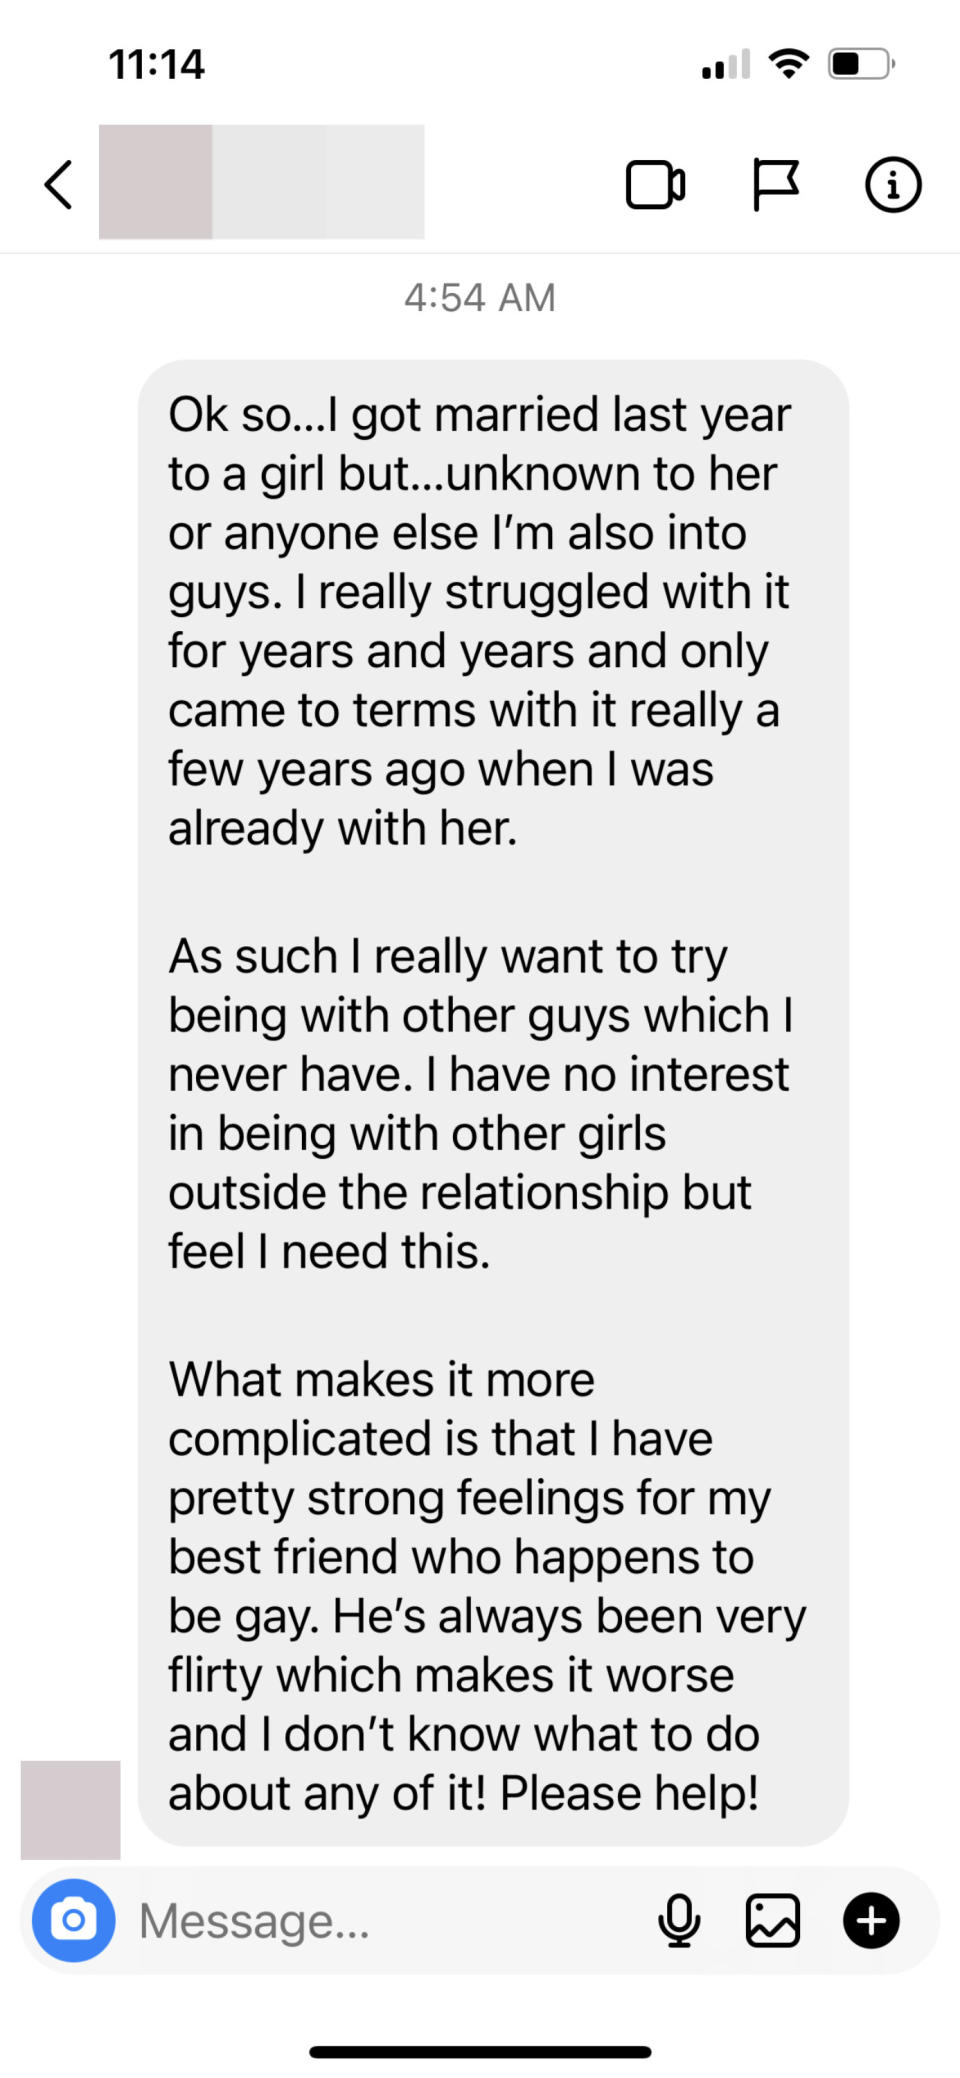 Screenshot of message, reading, "What makes it more complicated is that I have pretty strong feelings for my best friend who happens to be gay. ..."